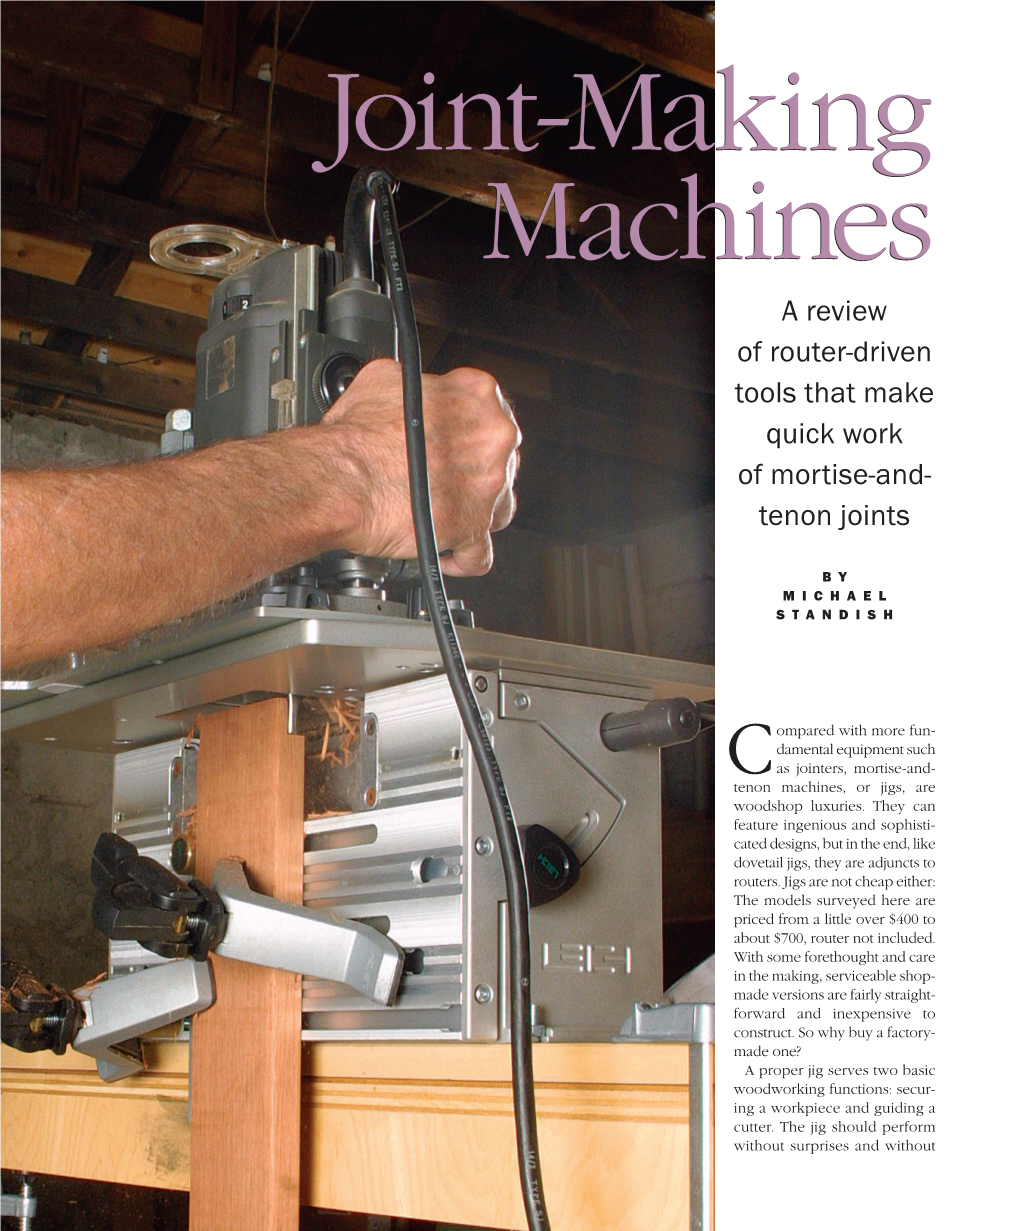 A Review of Router-Driven Tools That Make Quick Work of Mortise-And- Tenon Joints